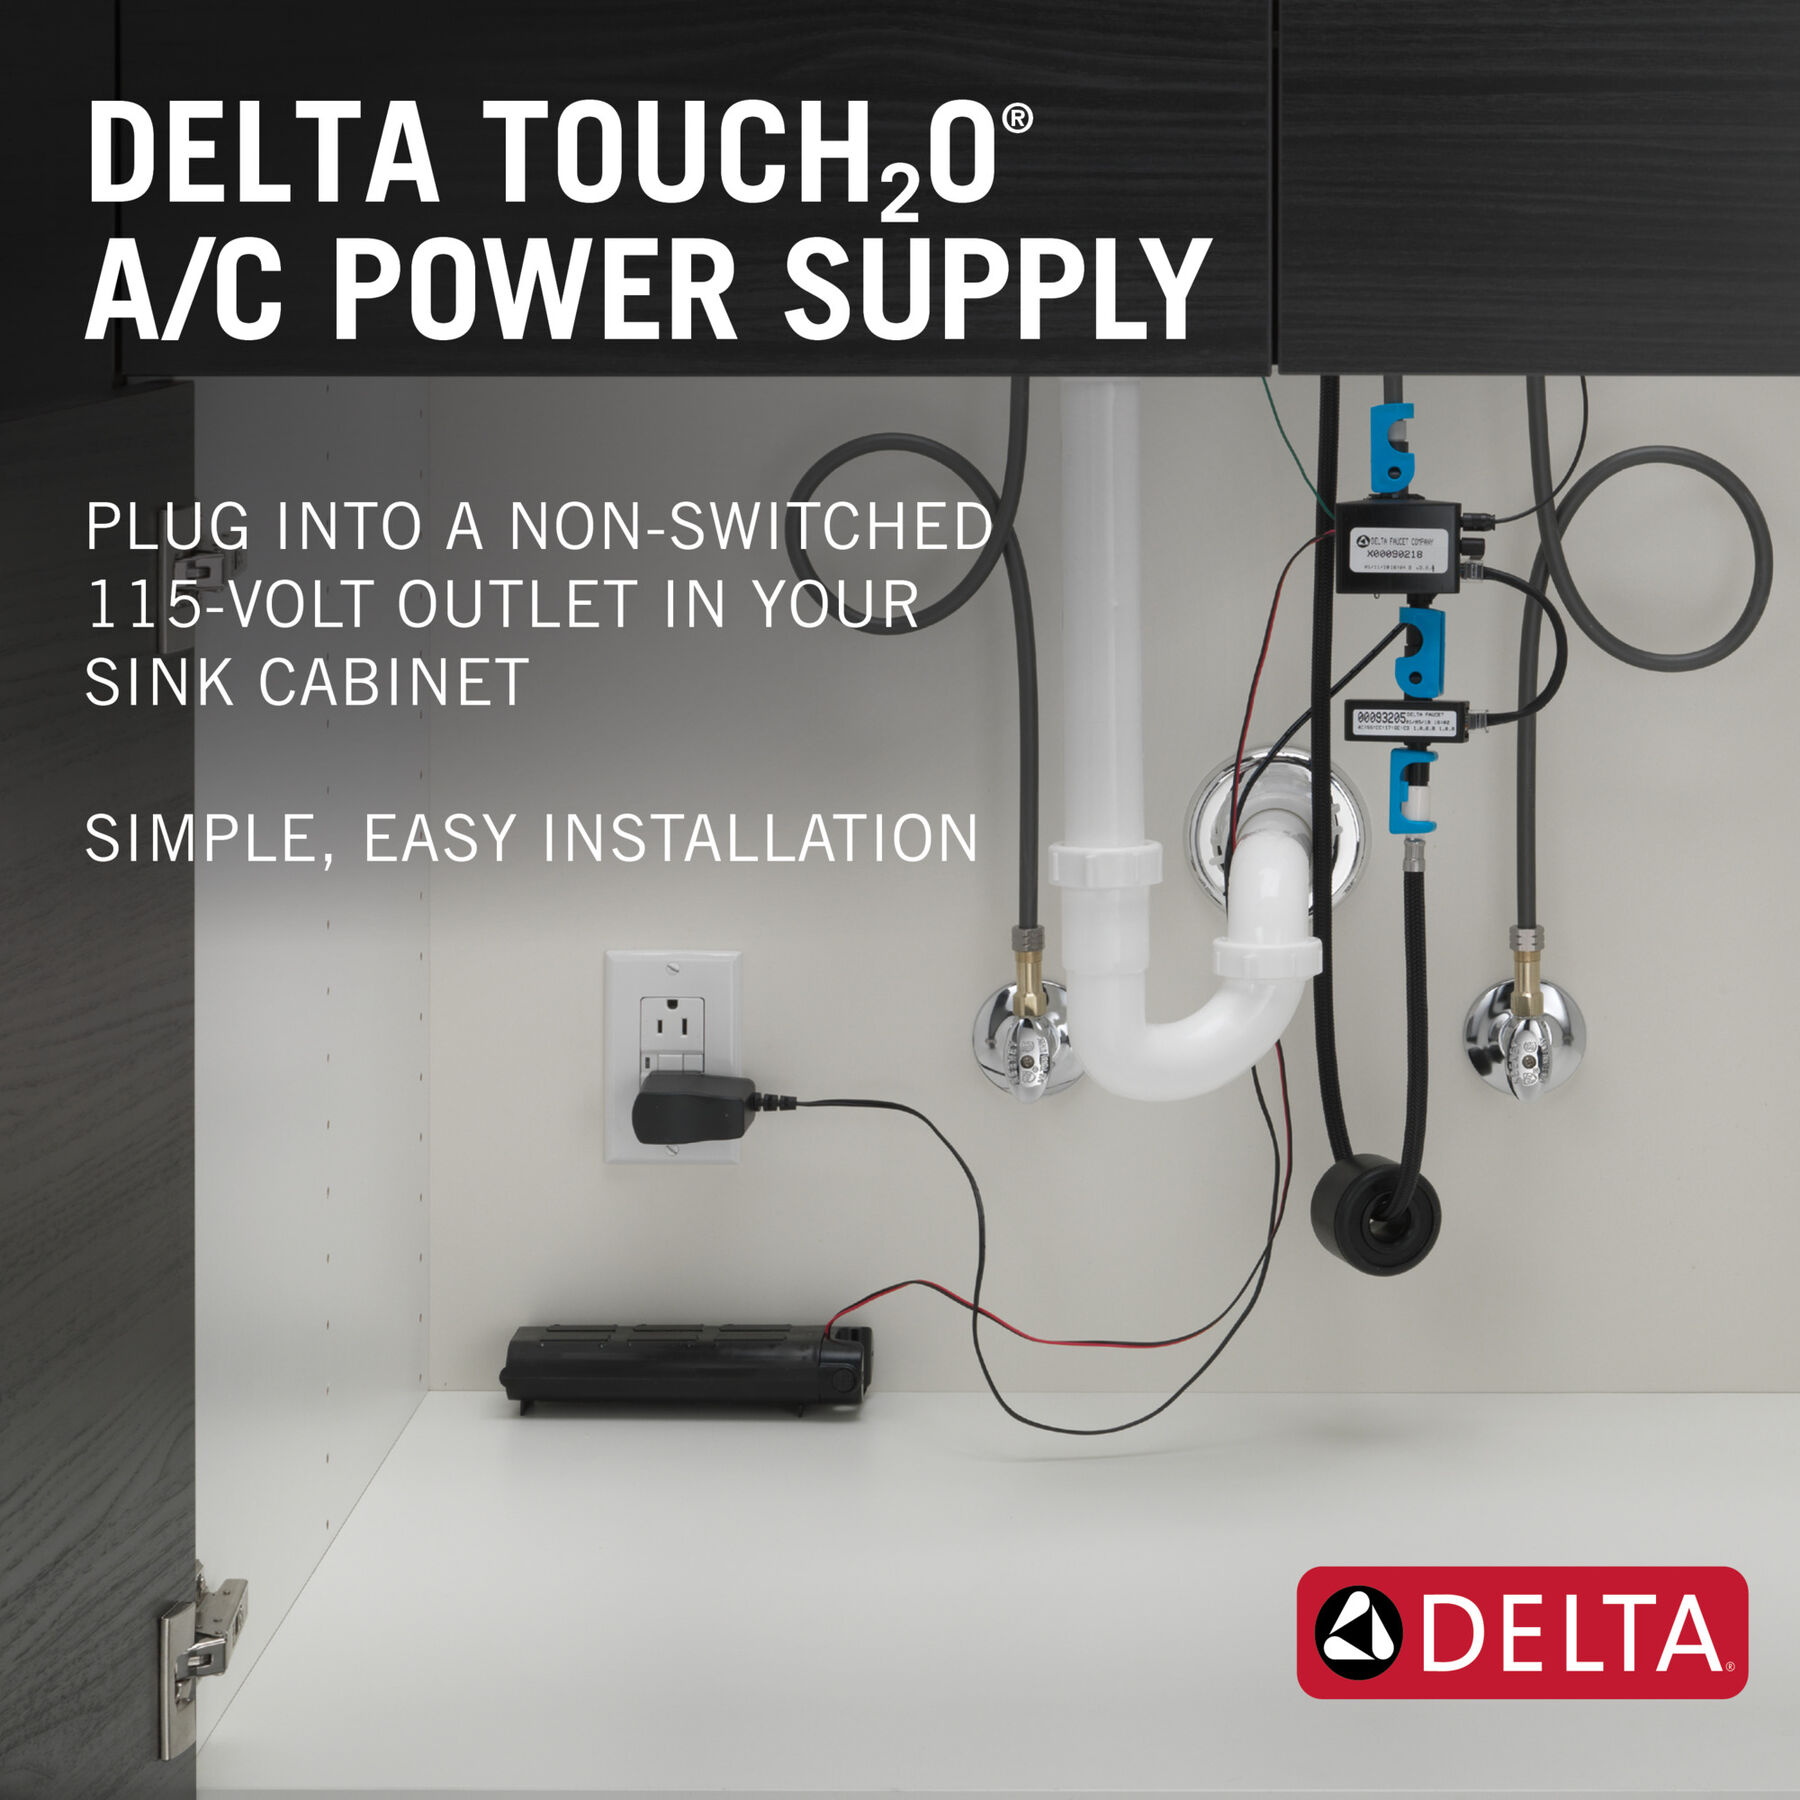 A/C Power Supply EP102157